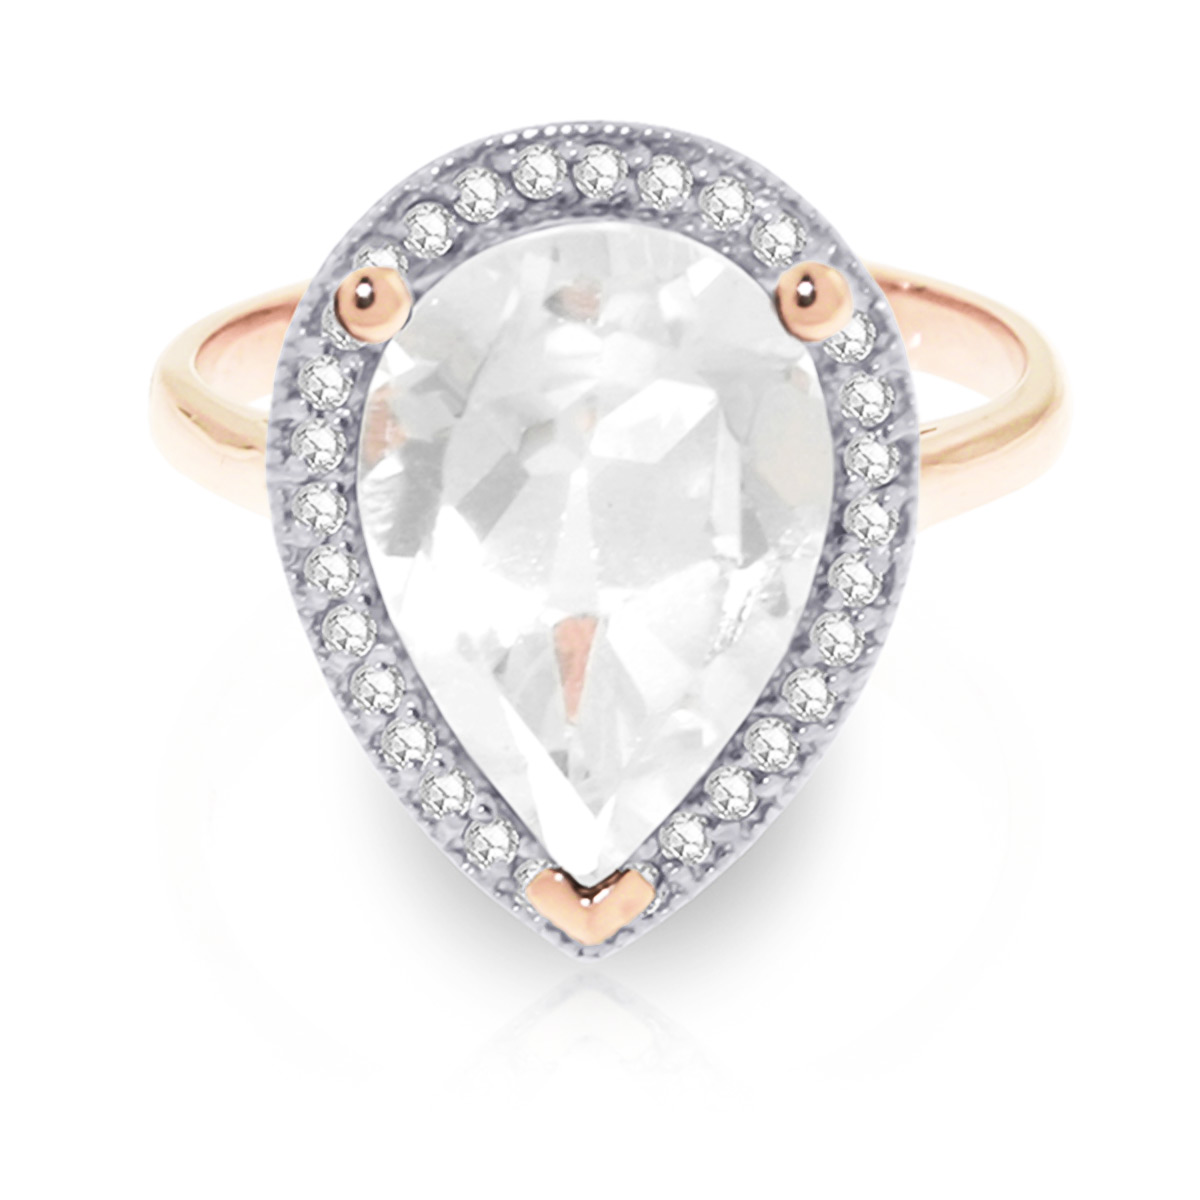 White Topaz Halo Ring 5.61 ctw in 18ct Rose Gold